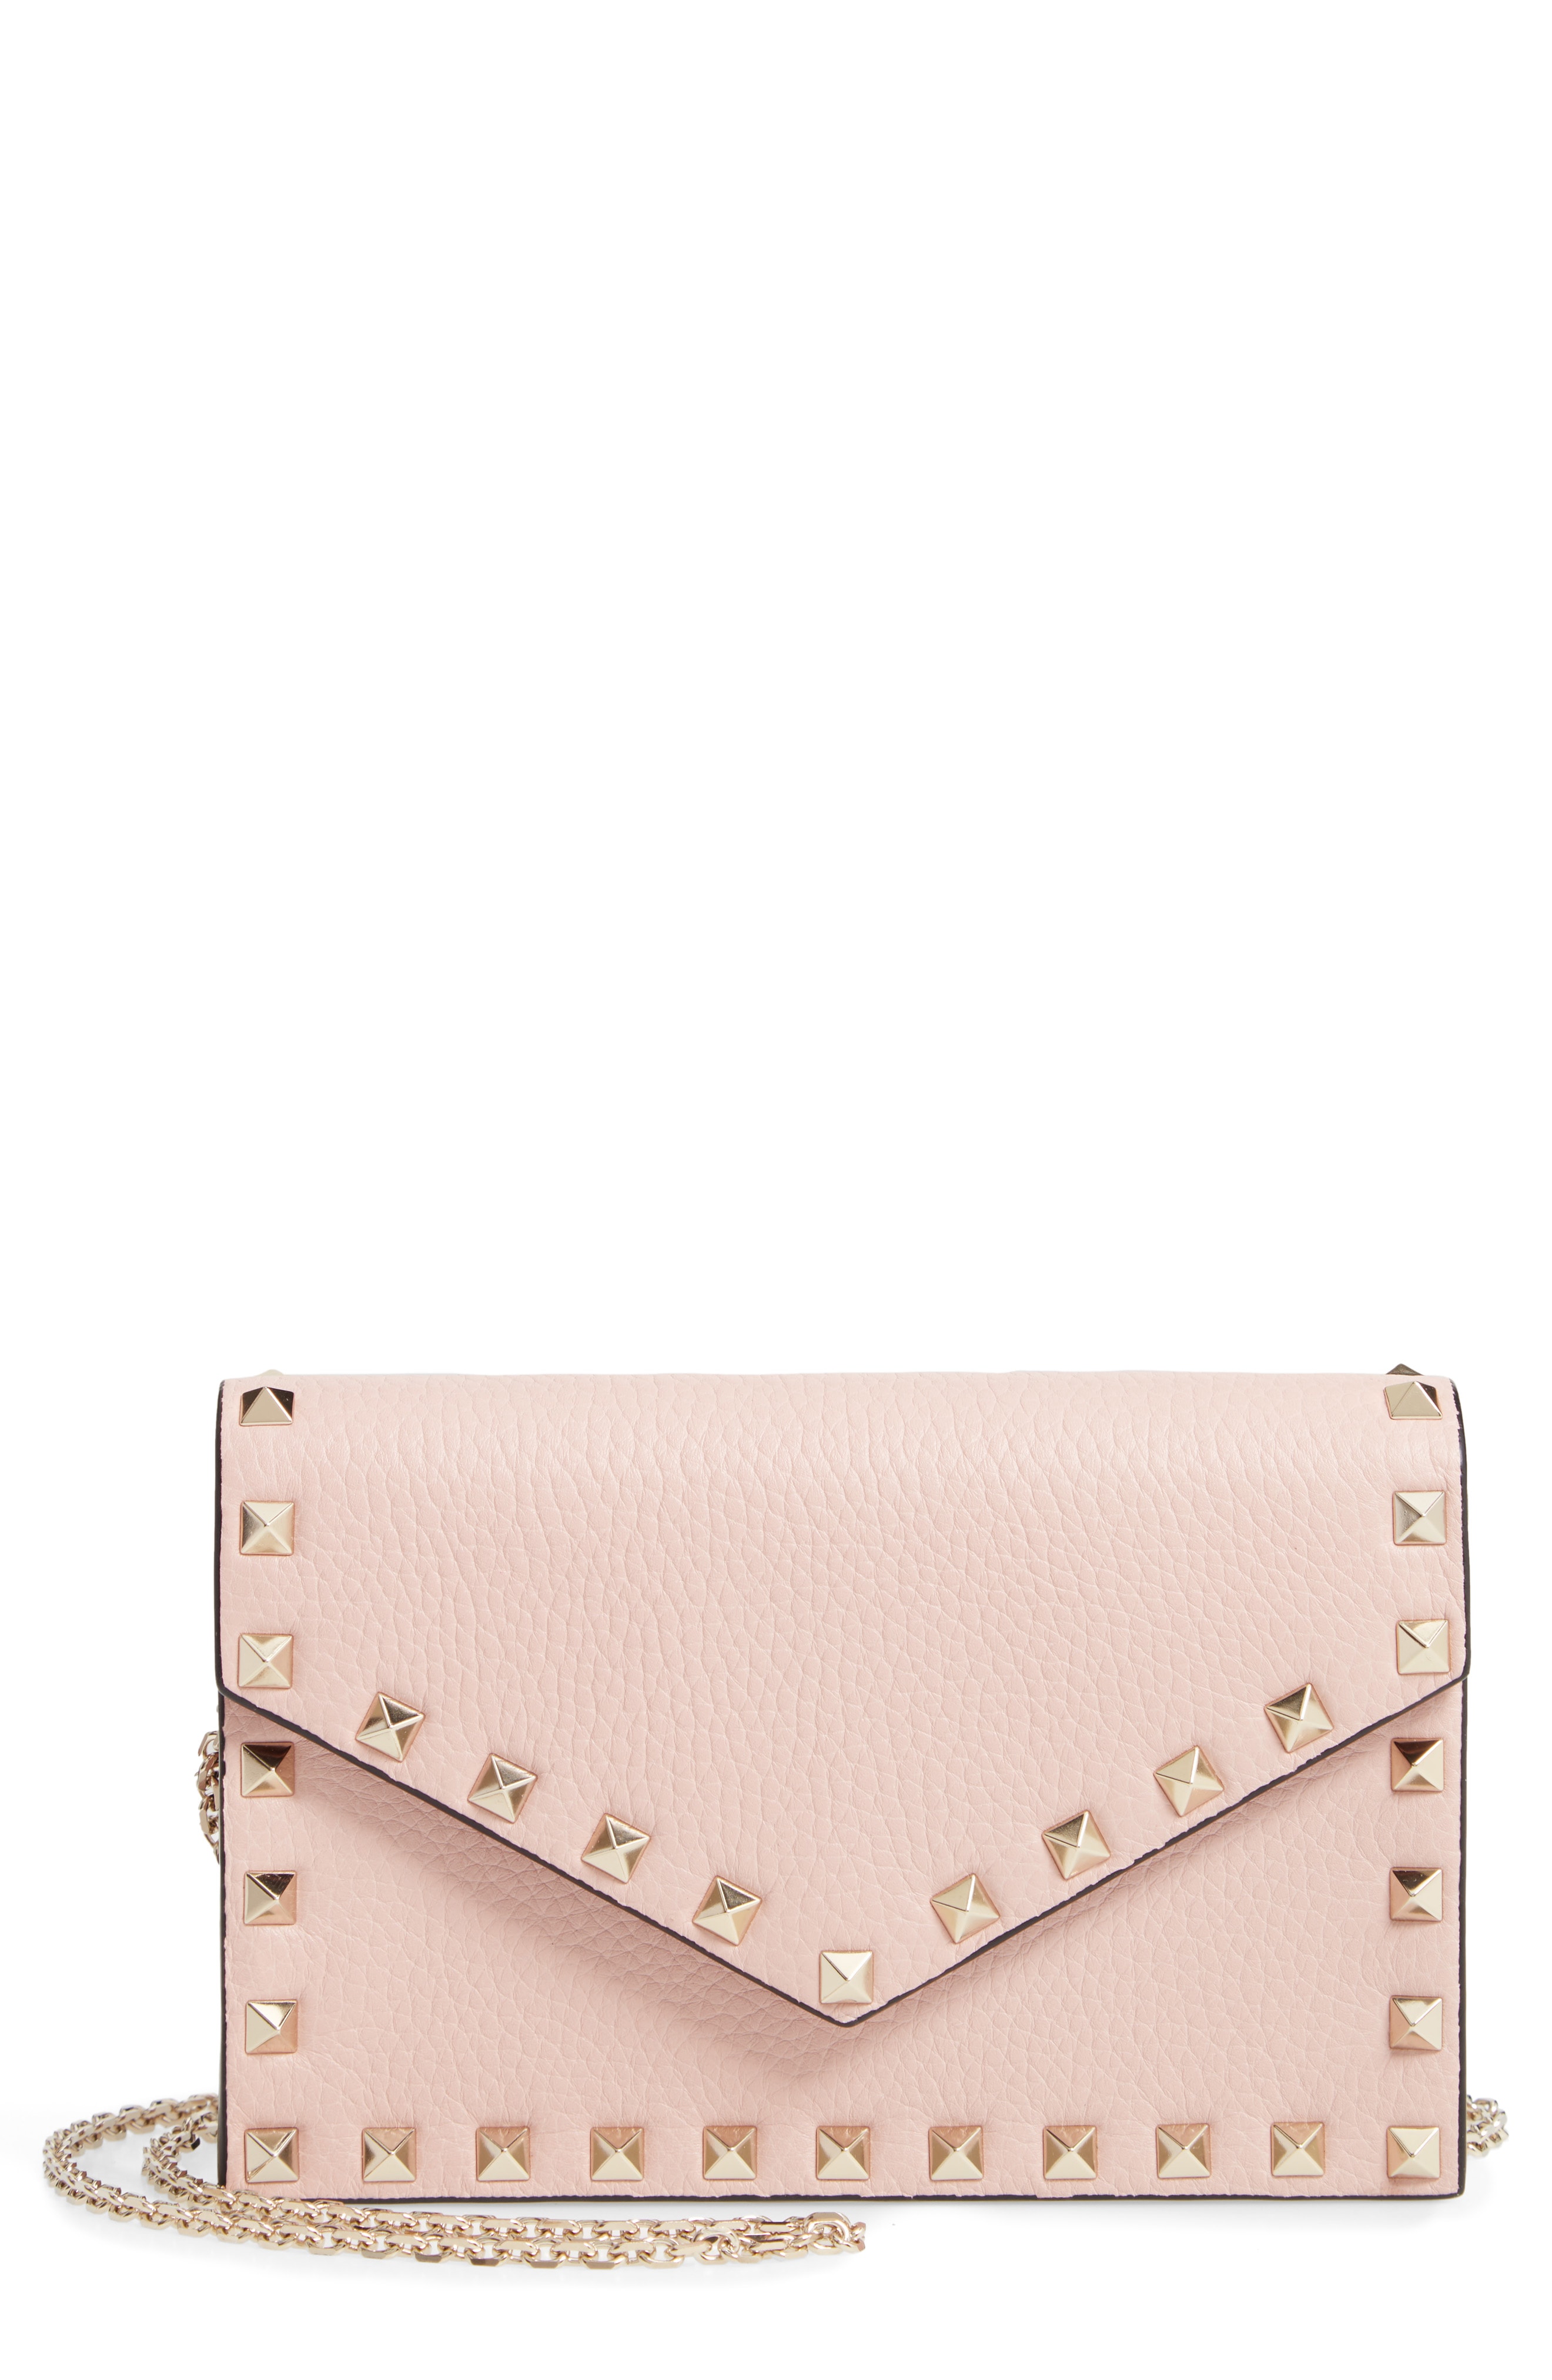 Clutches & Pouches | Nordstrom